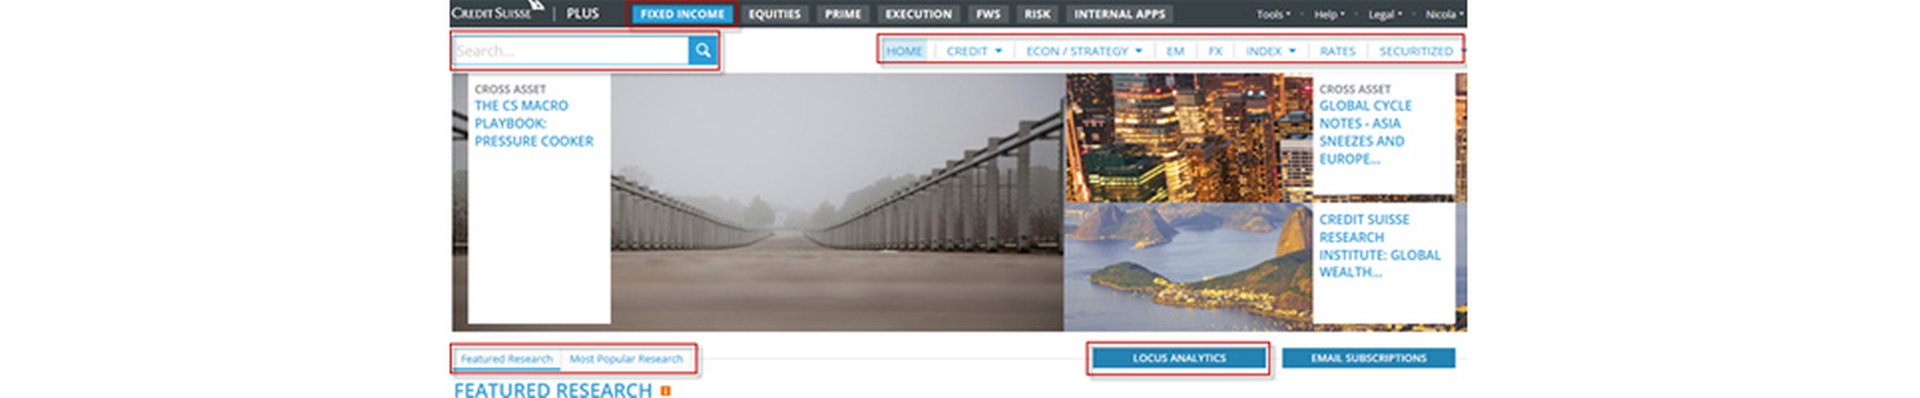 The Fixed Income page has a new layout